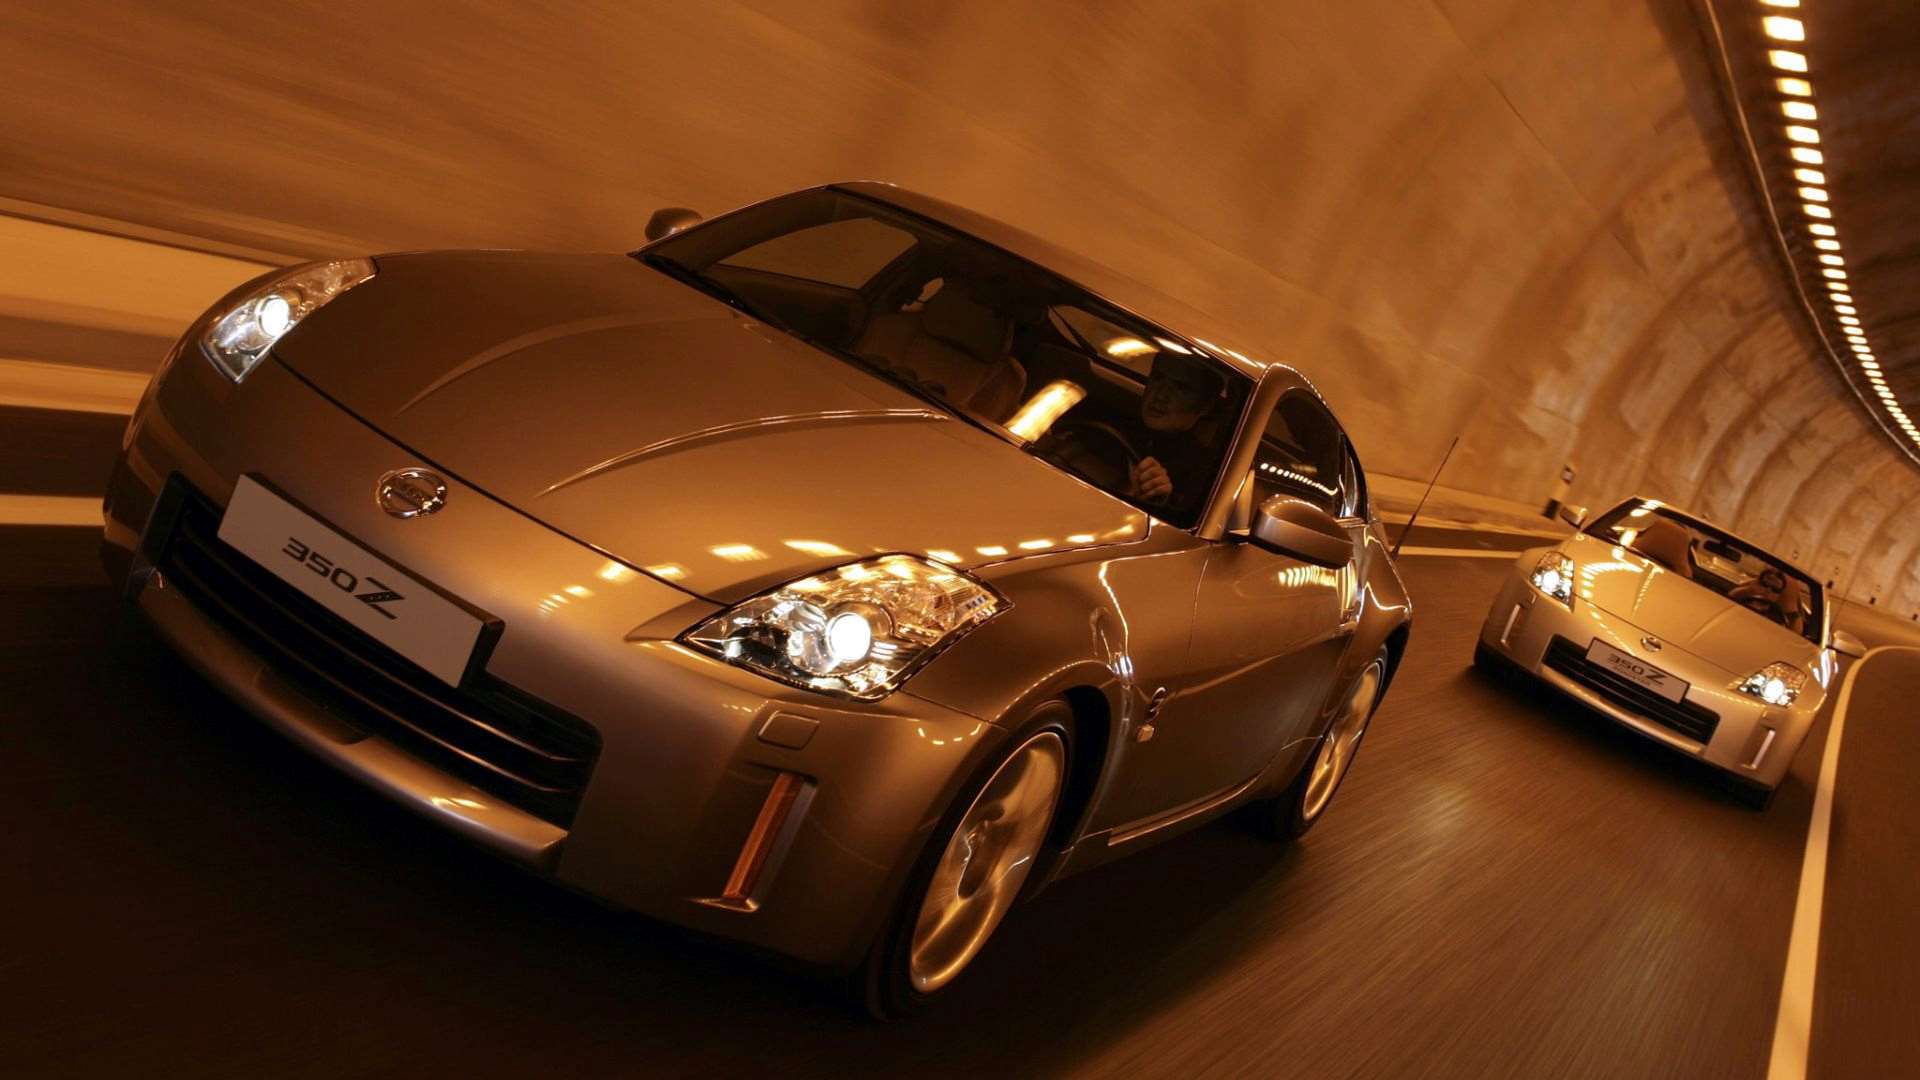 pictures_nissan_350z_1.jpg